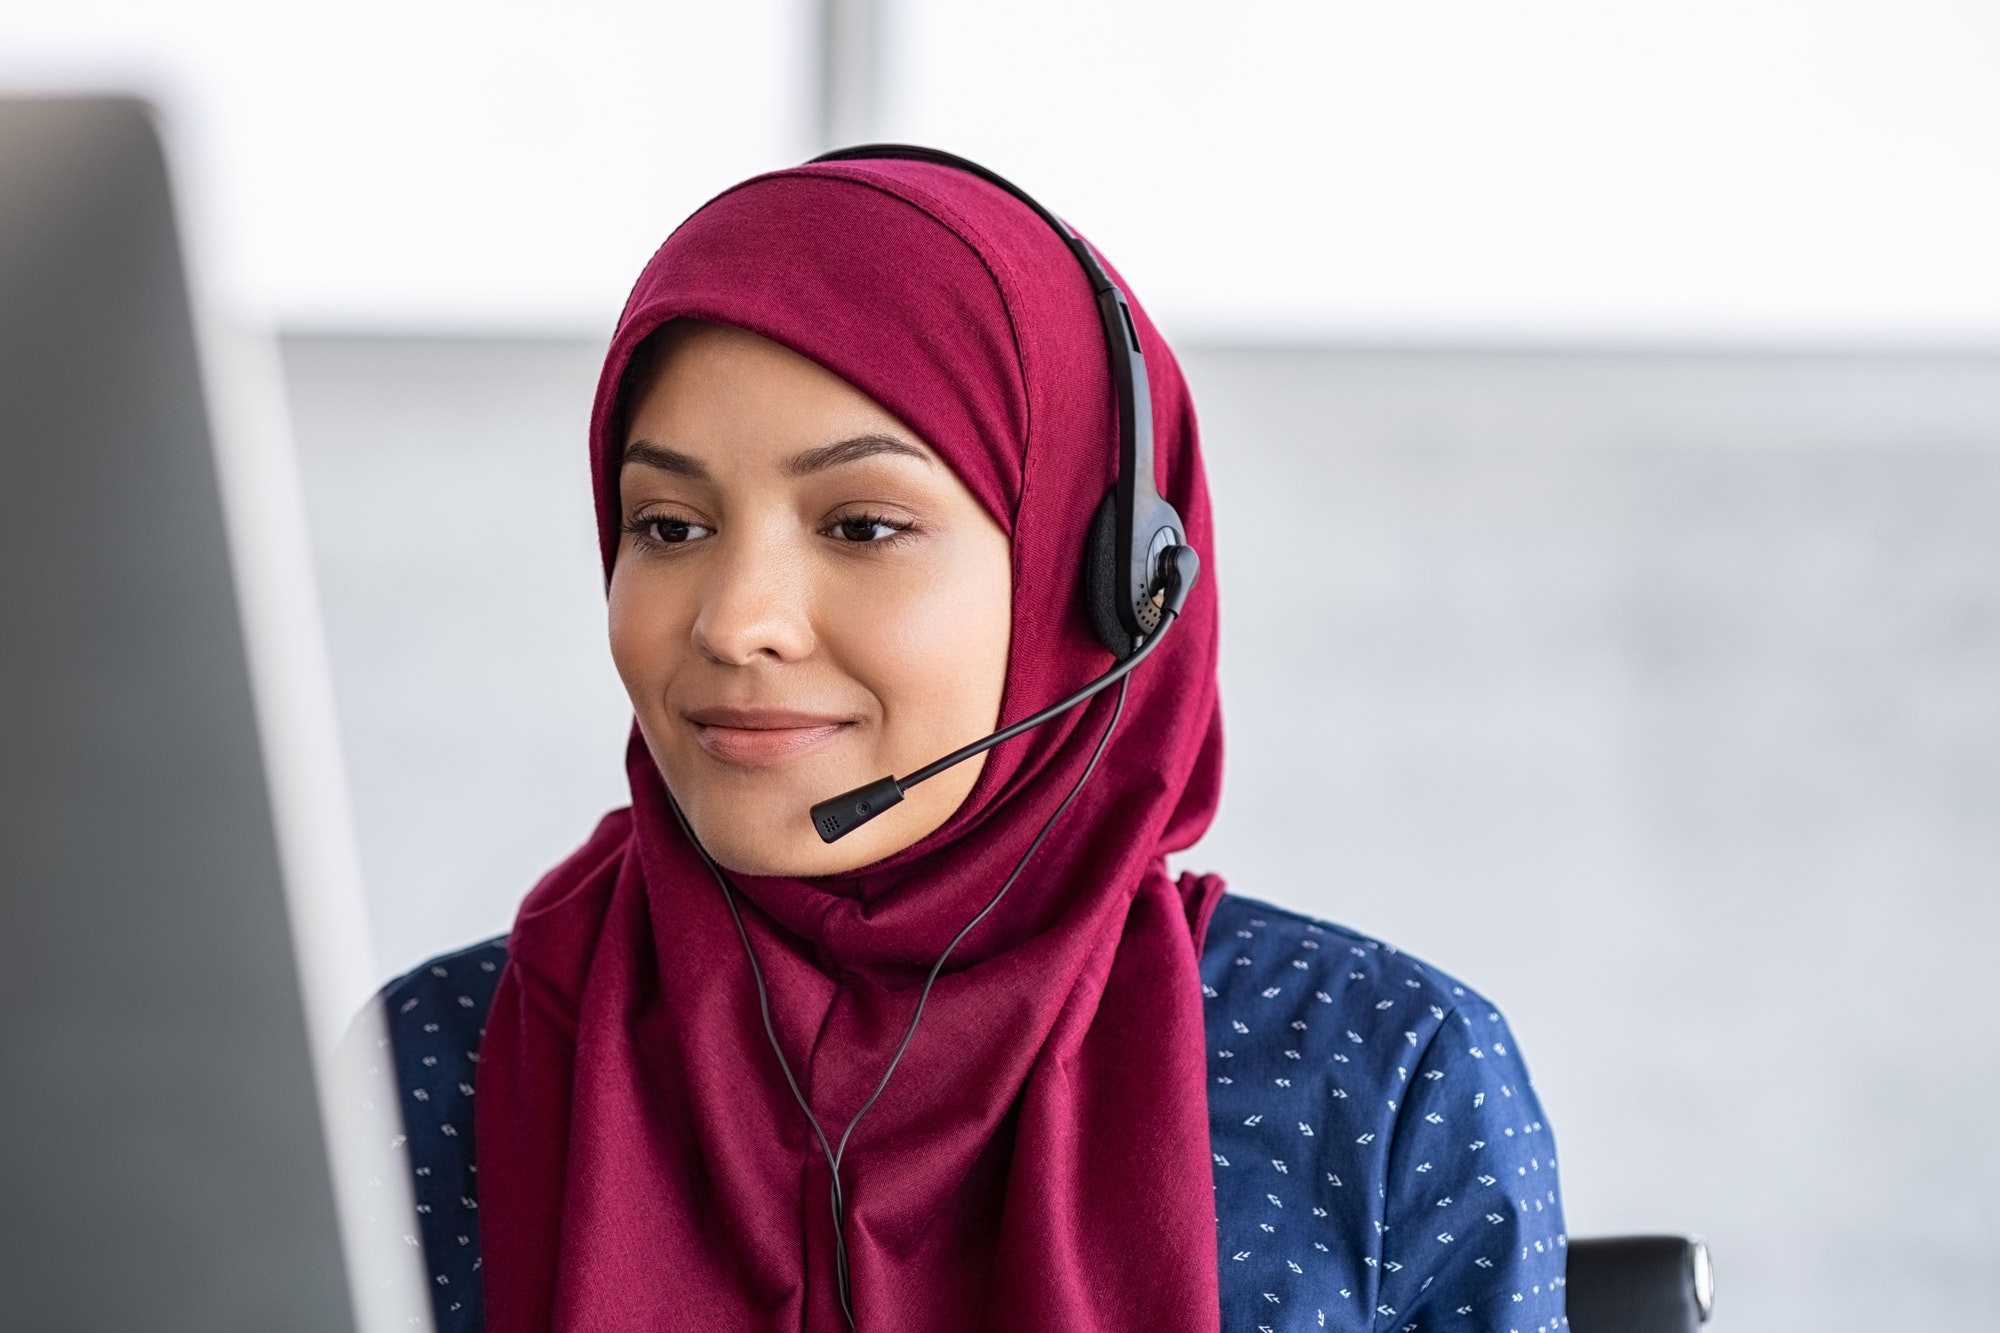 Islamic woman with hijab in call center